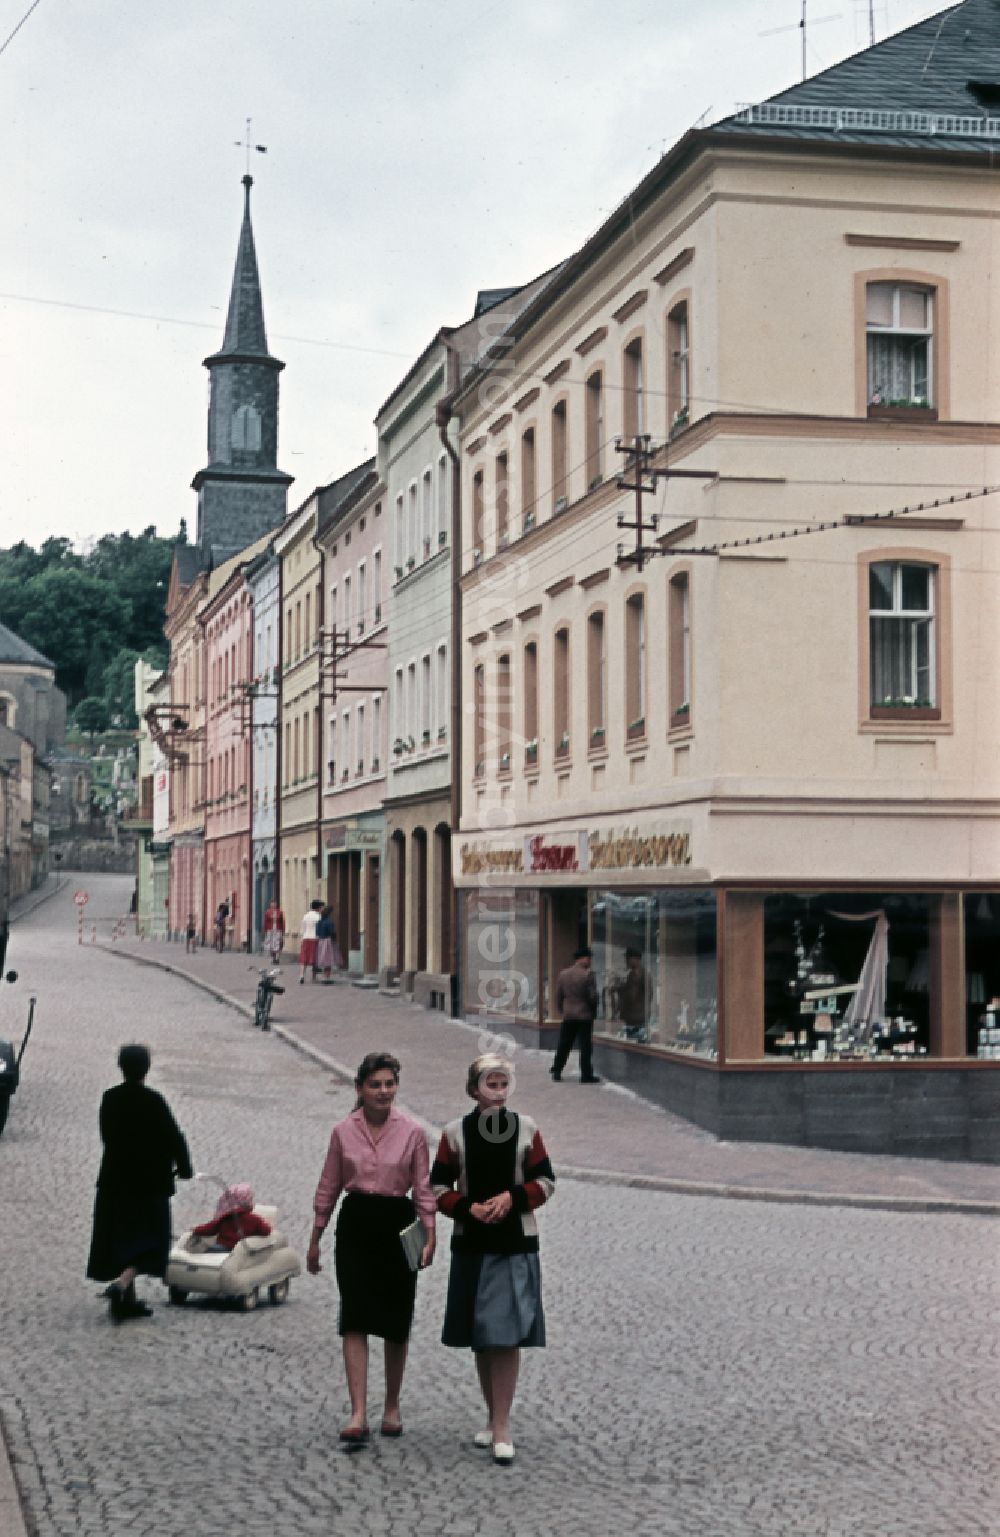 GDR photo archive: Bad Lobenstein - House facades with shop windows in Bad Lobenstein, Thuringia in the area of the former GDR, German Democratic Republic